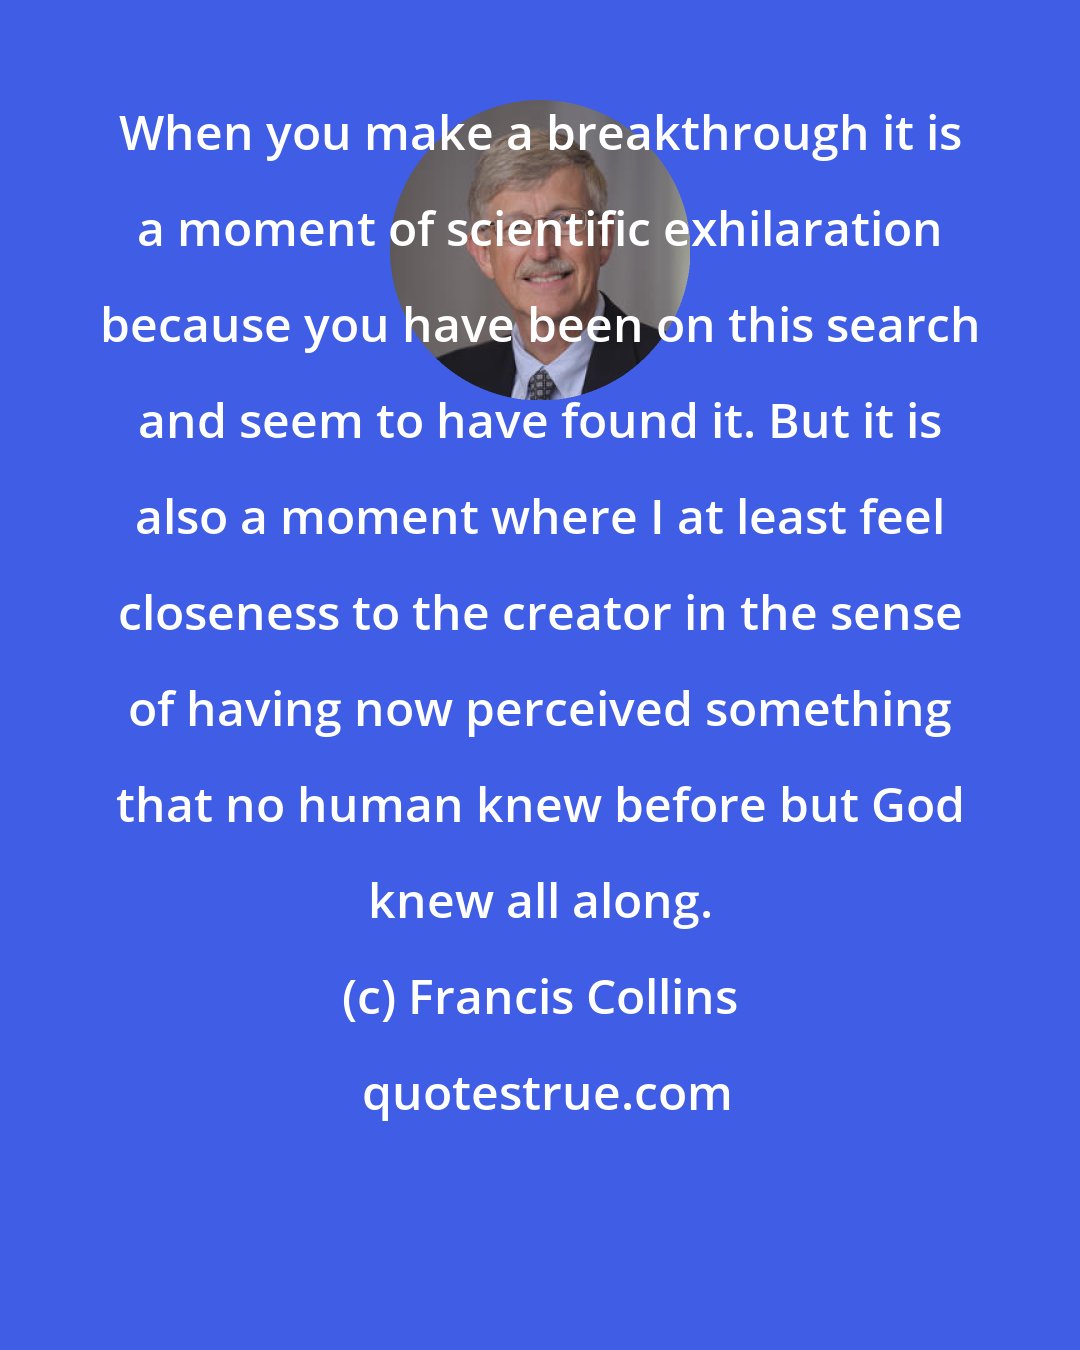 Francis Collins: When you make a breakthrough it is a moment of scientific exhilaration because you have been on this search and seem to have found it. But it is also a moment where I at least feel closeness to the creator in the sense of having now perceived something that no human knew before but God knew all along.